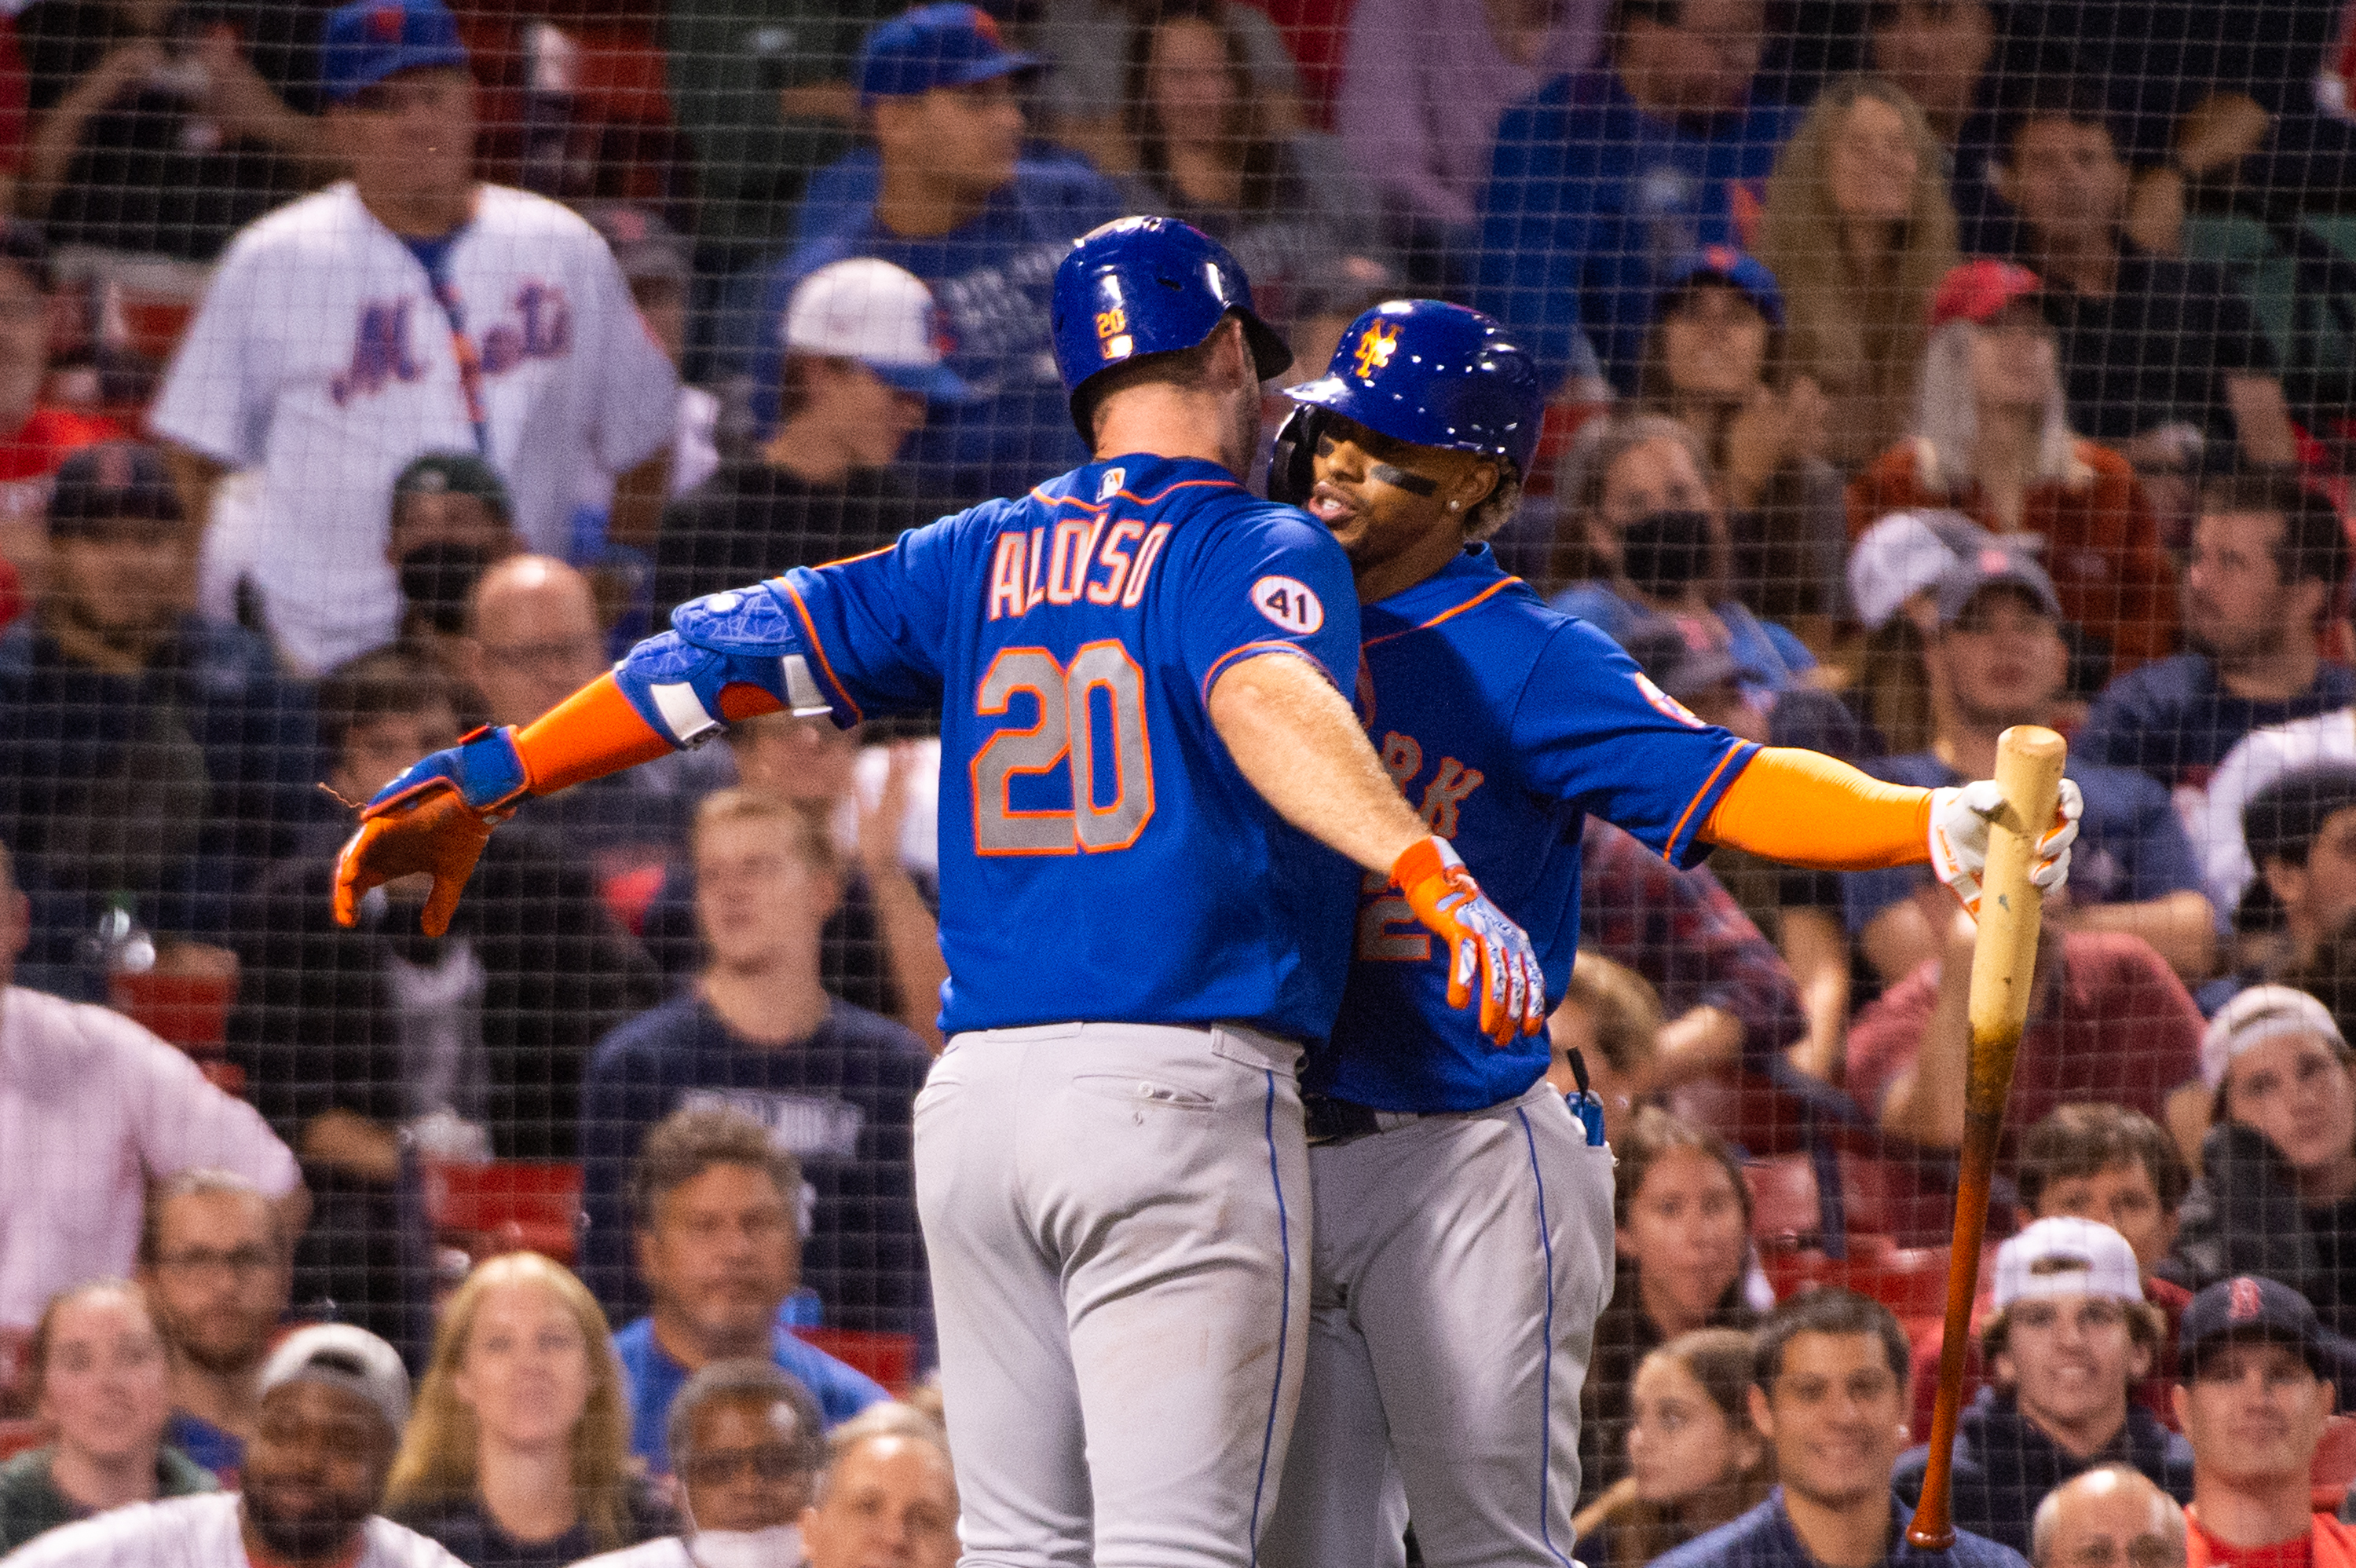 Pete Alonso potential long-term contract framework